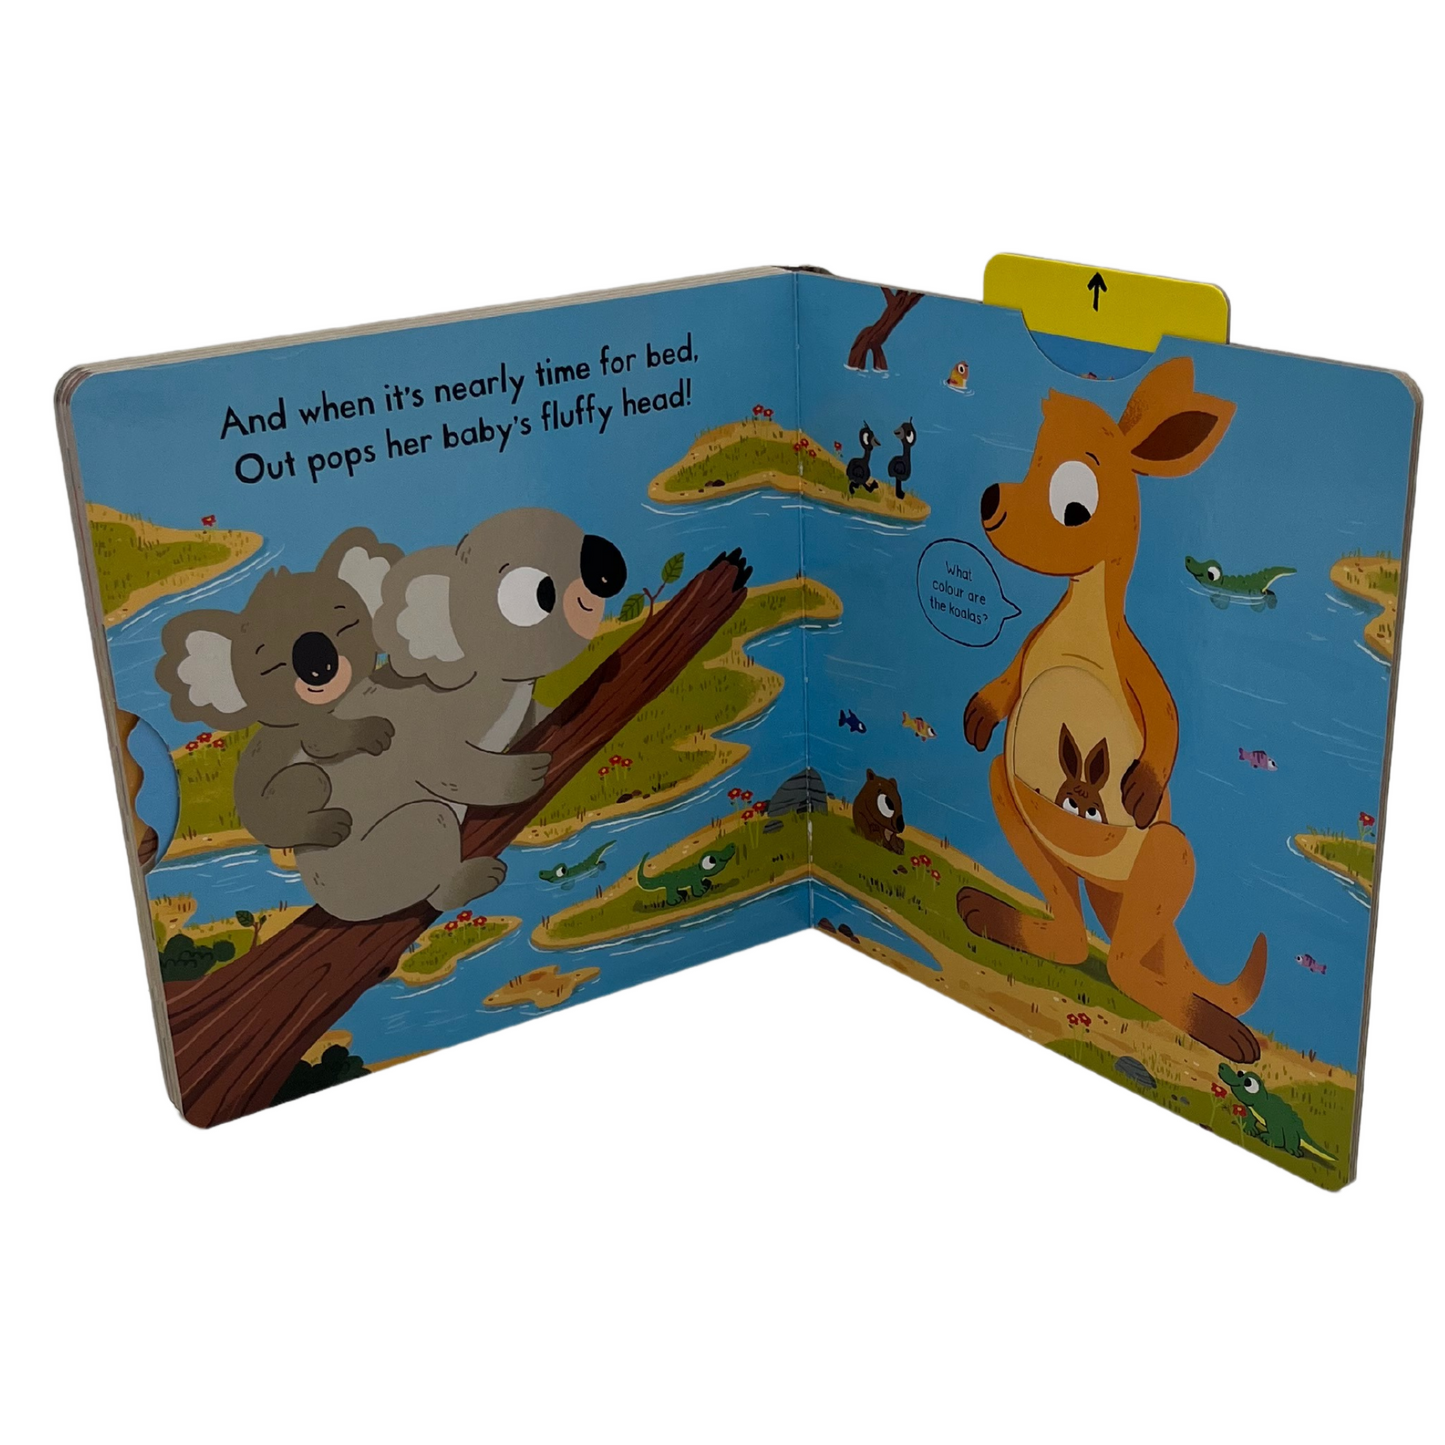 Busy Kangaroo, Push, Pull and Slide Board Book - Interest age 1-4 Years